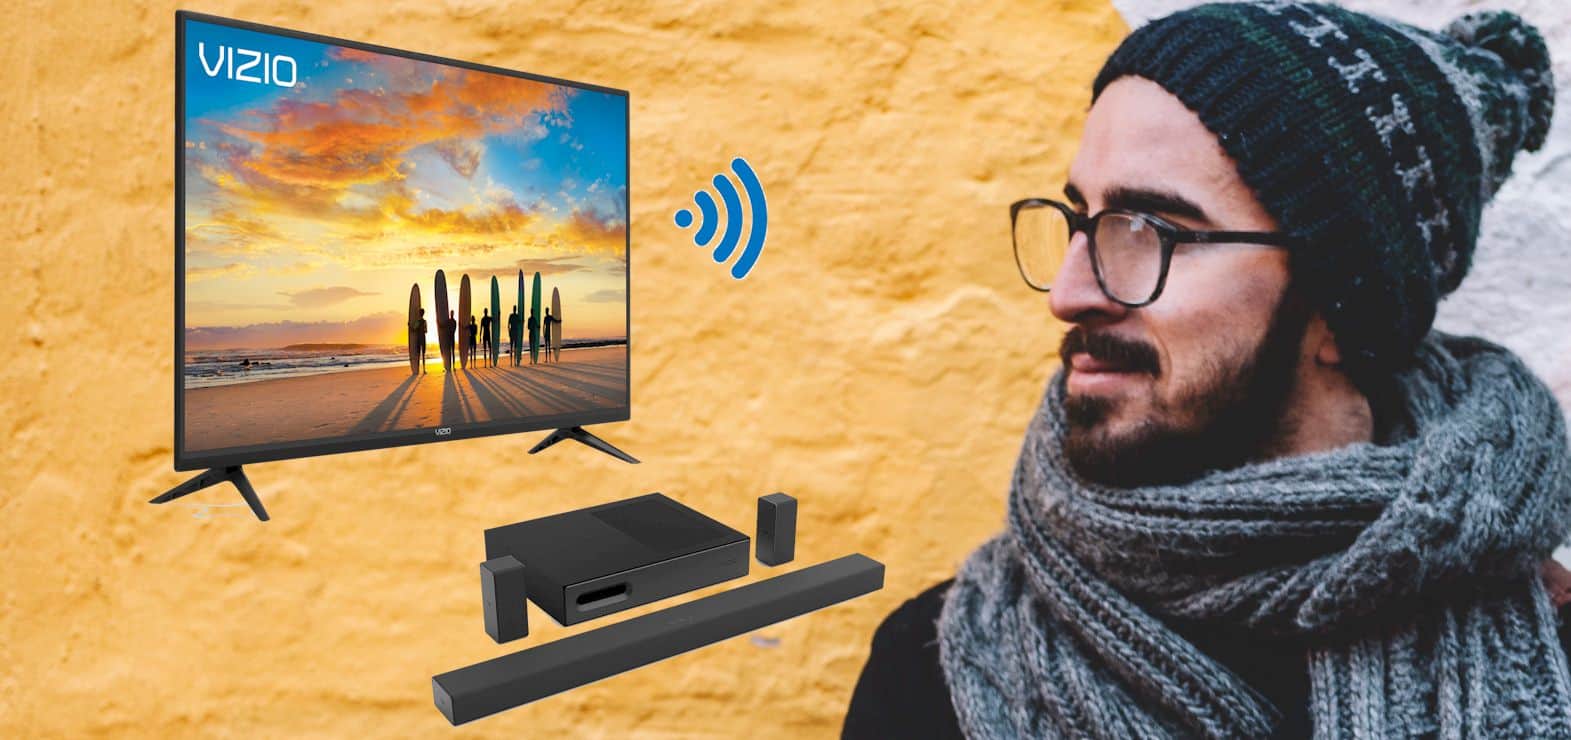 connect Vizio tv to Wi-Fi without a remote